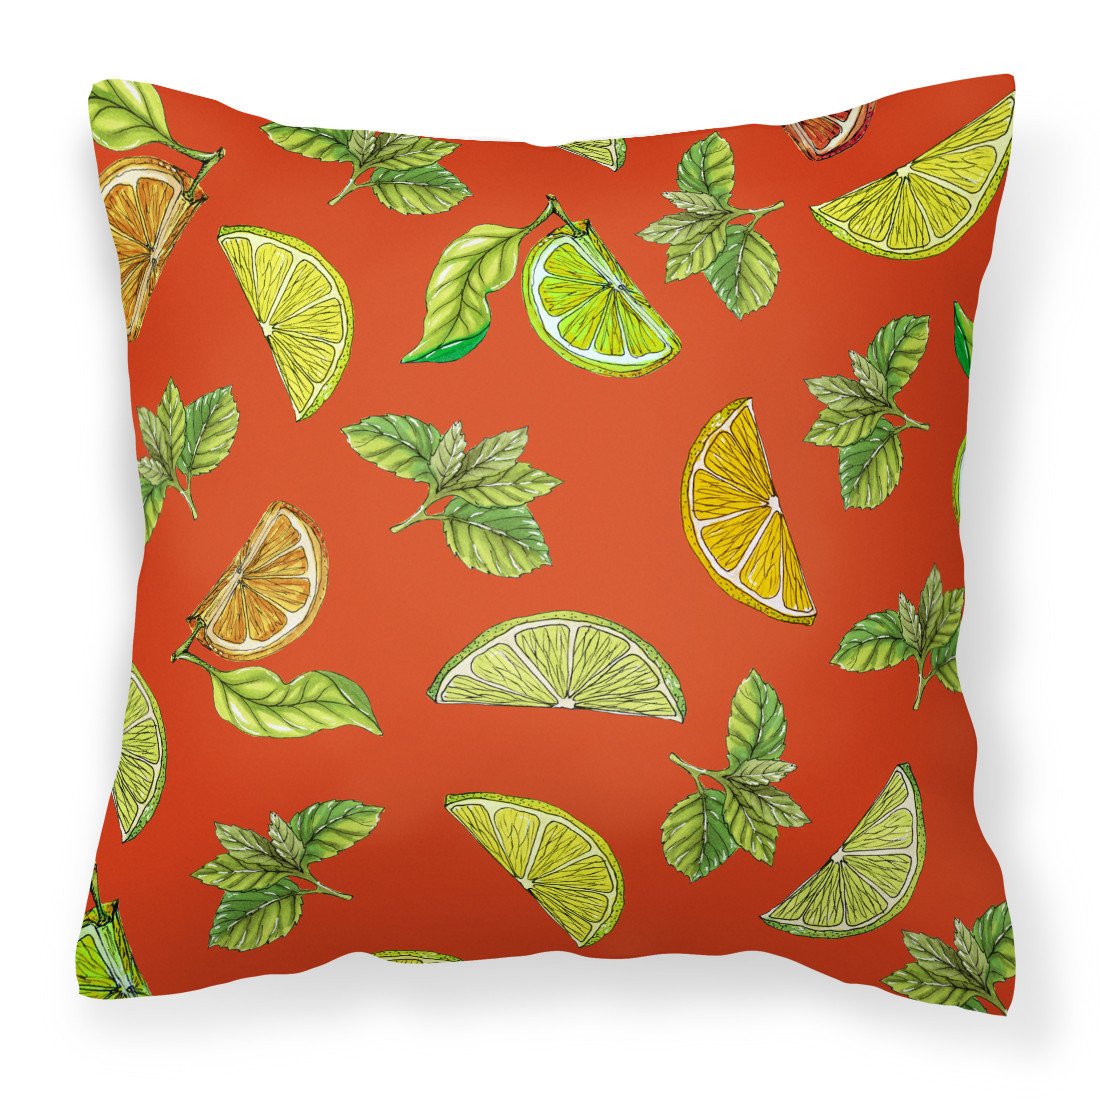 Lemons, Limes and Oranges Fabric Decorative Pillow BB5205PW1818 by Caroline's Treasures